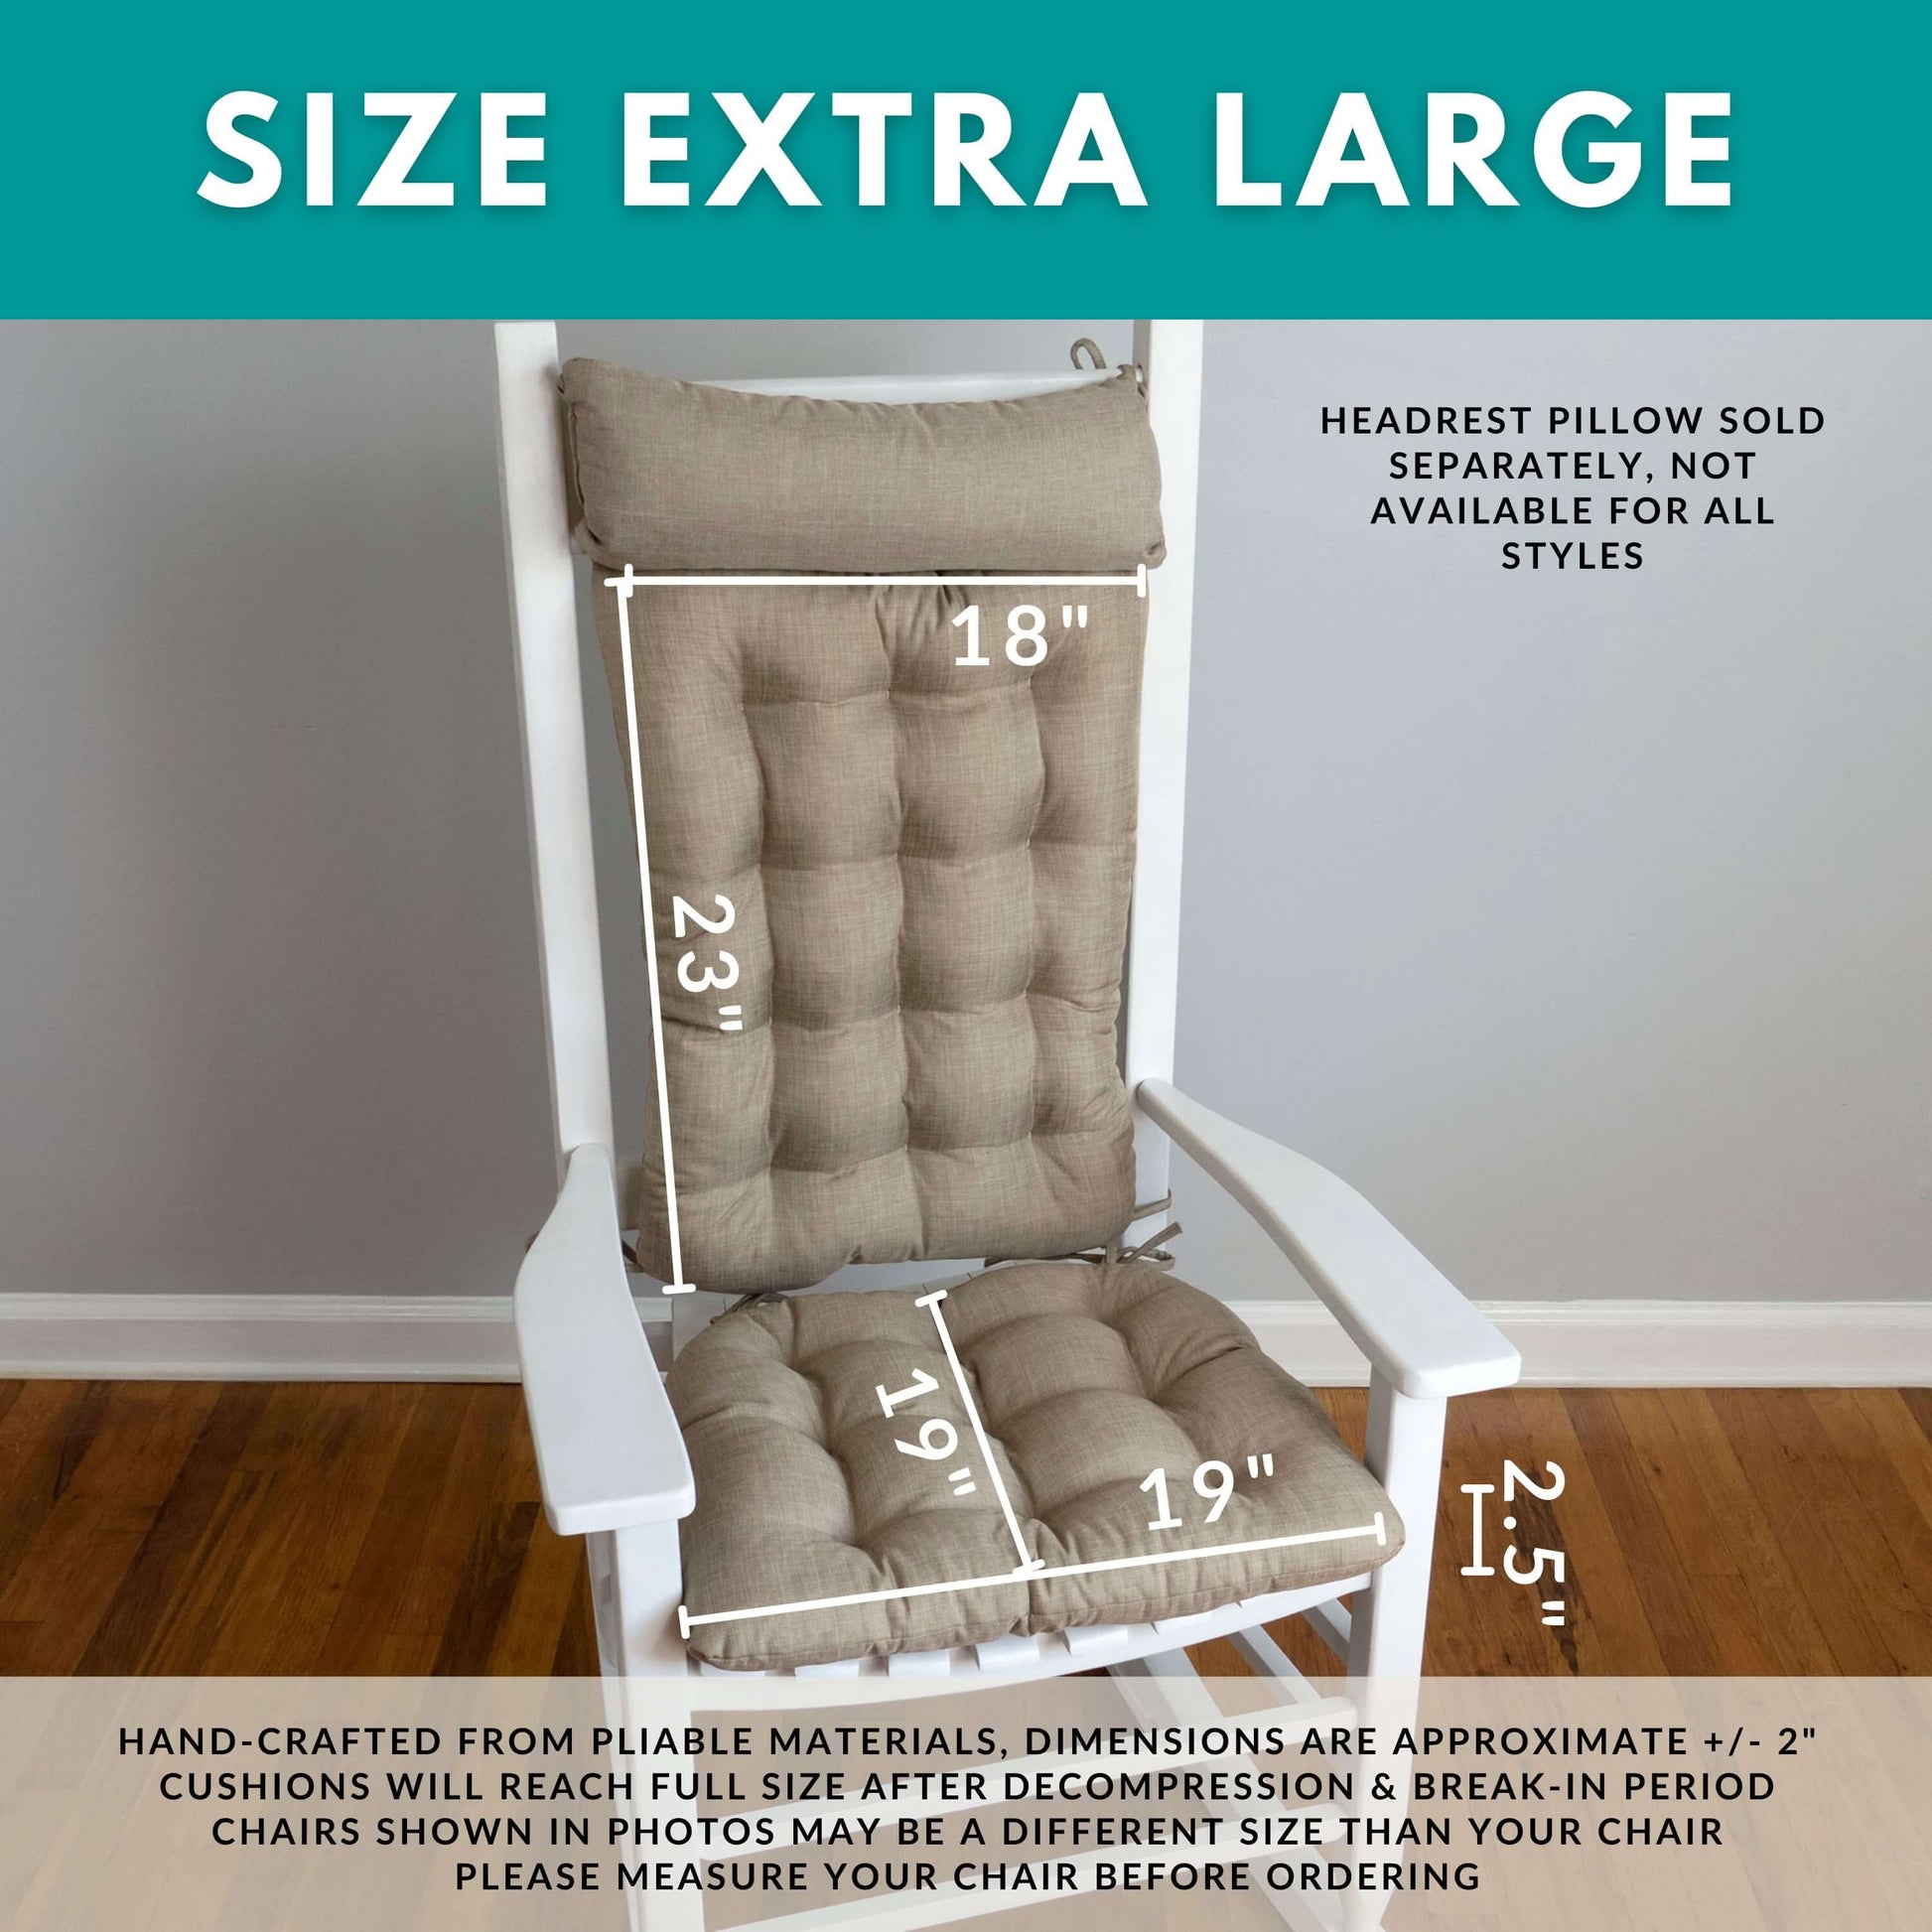 Dimensions of seat cushion